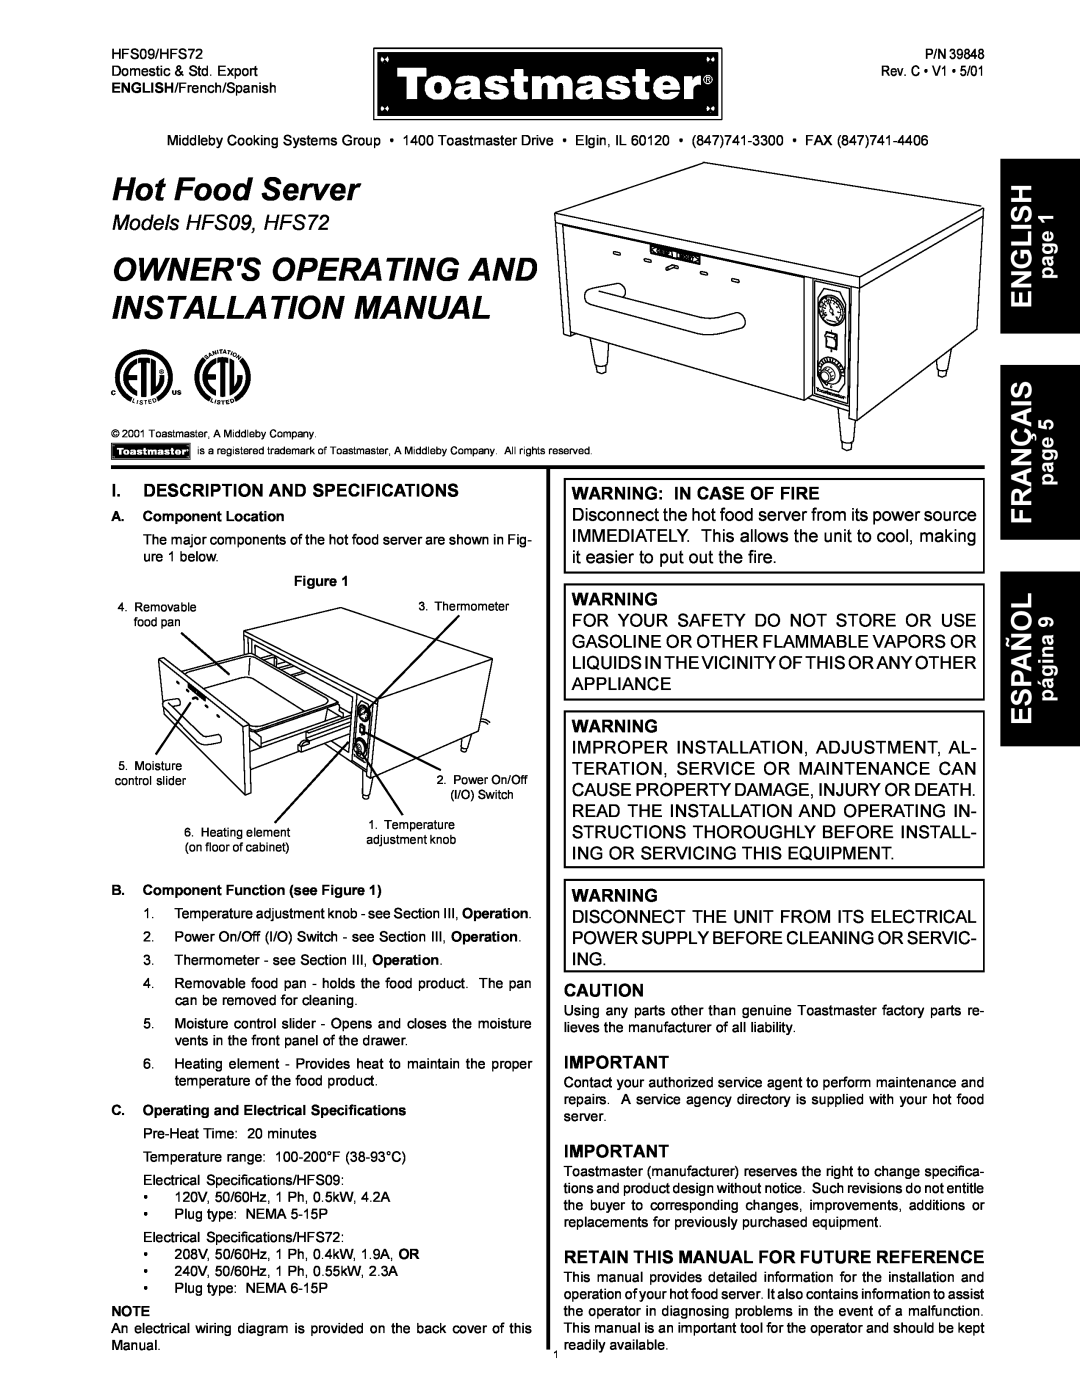 Toastmaster HFS09 installation manual Hot Food Server, Owners Operating And, Installation Manual, Warning In Case Of Fire 